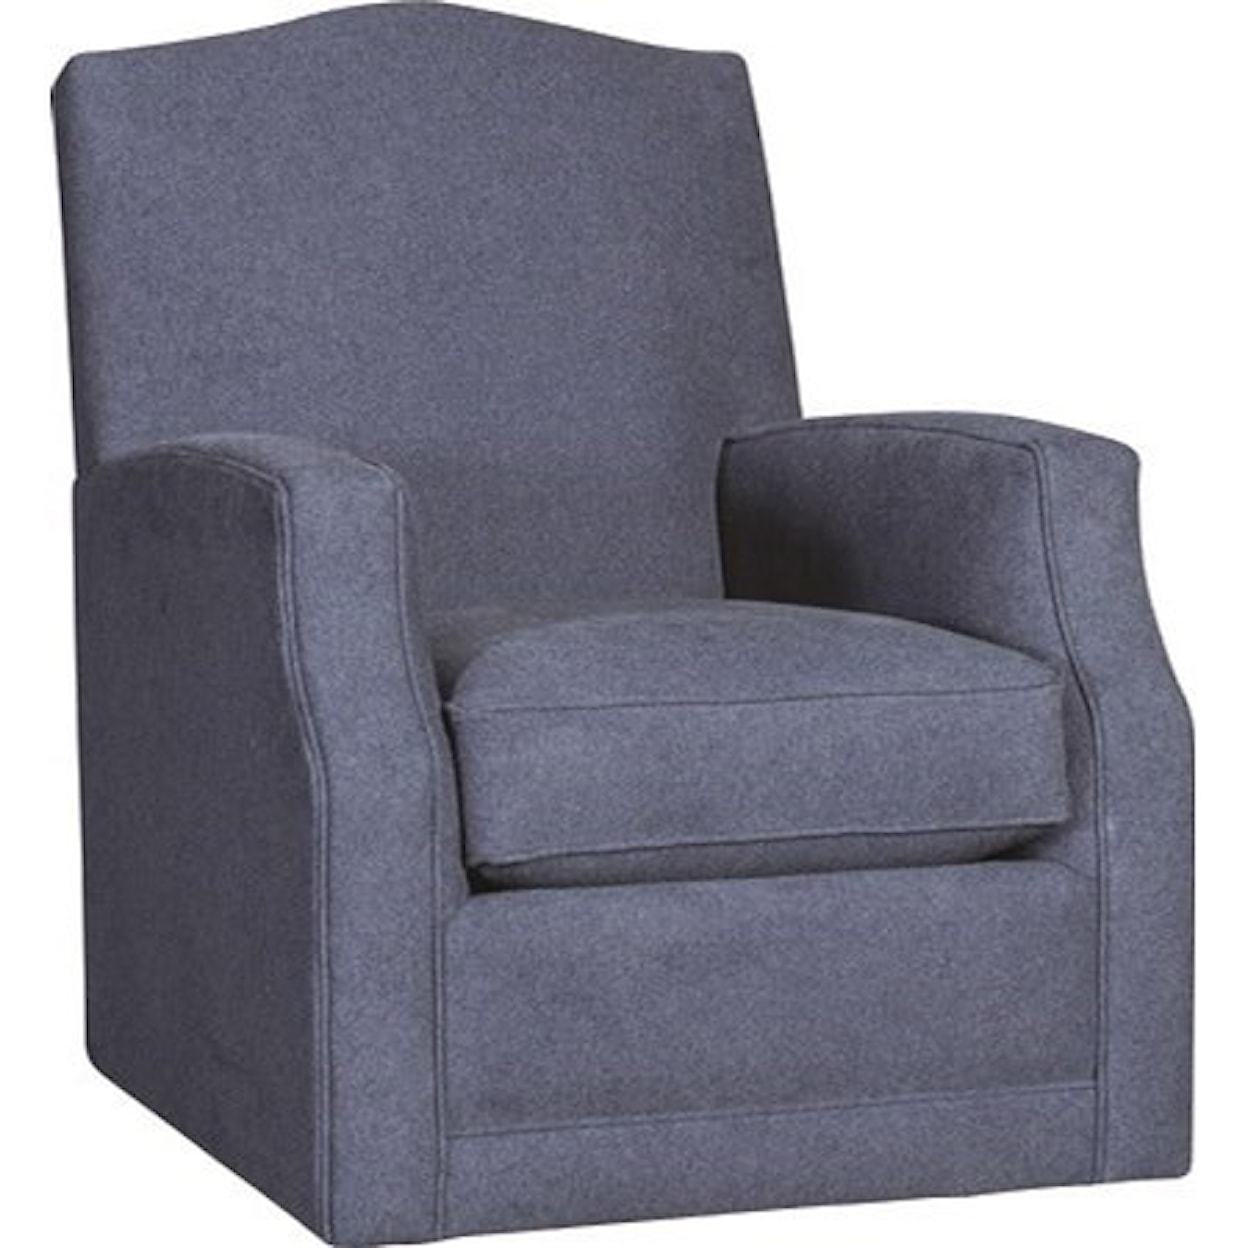 Mayo 3100 Upholstered Chair